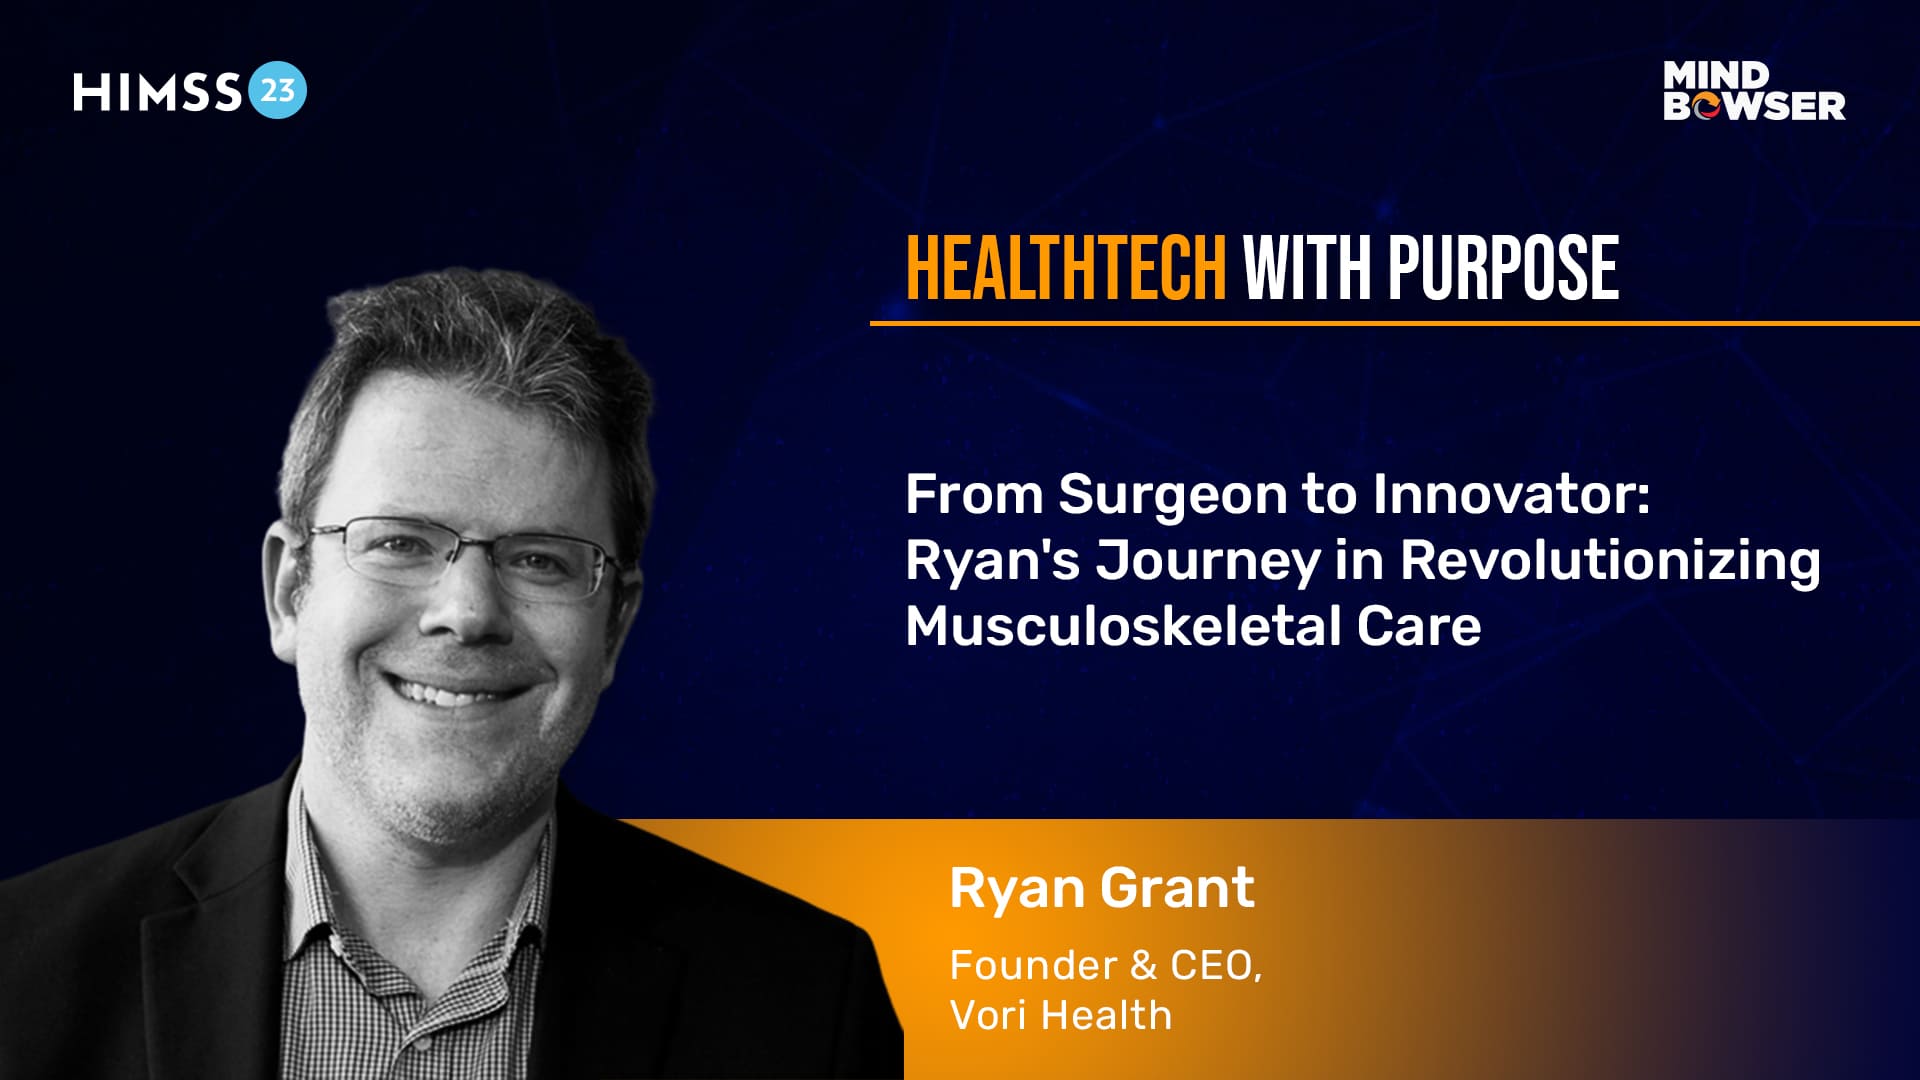 From Surgeon to Innovator: Journey in Revolutionizing Musculoskeletal Care - Podcast by Ryan Grant